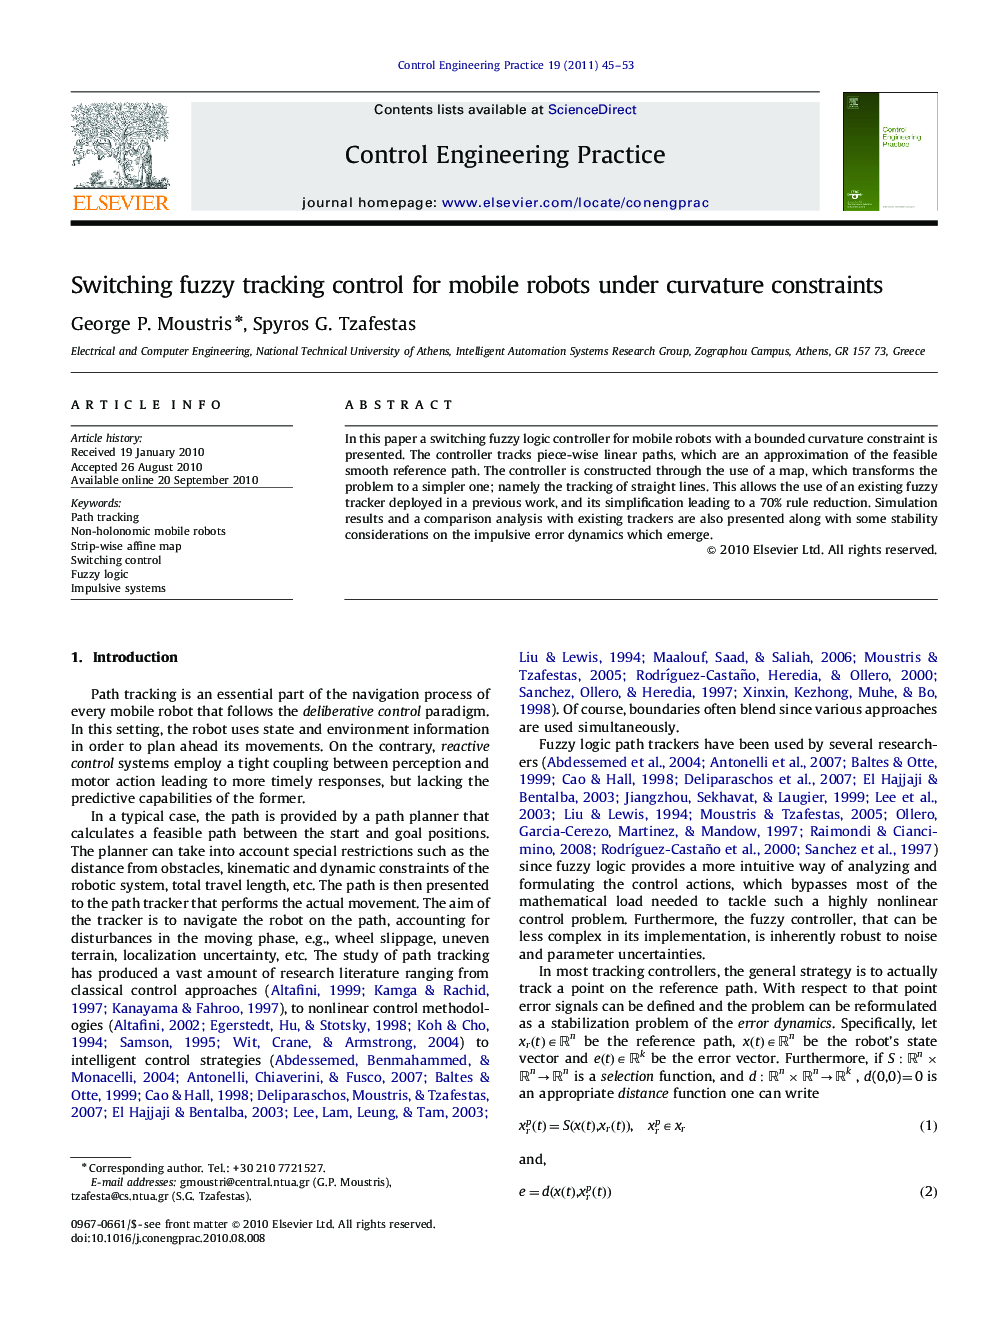 Switching fuzzy tracking control for mobile robots under curvature constraints